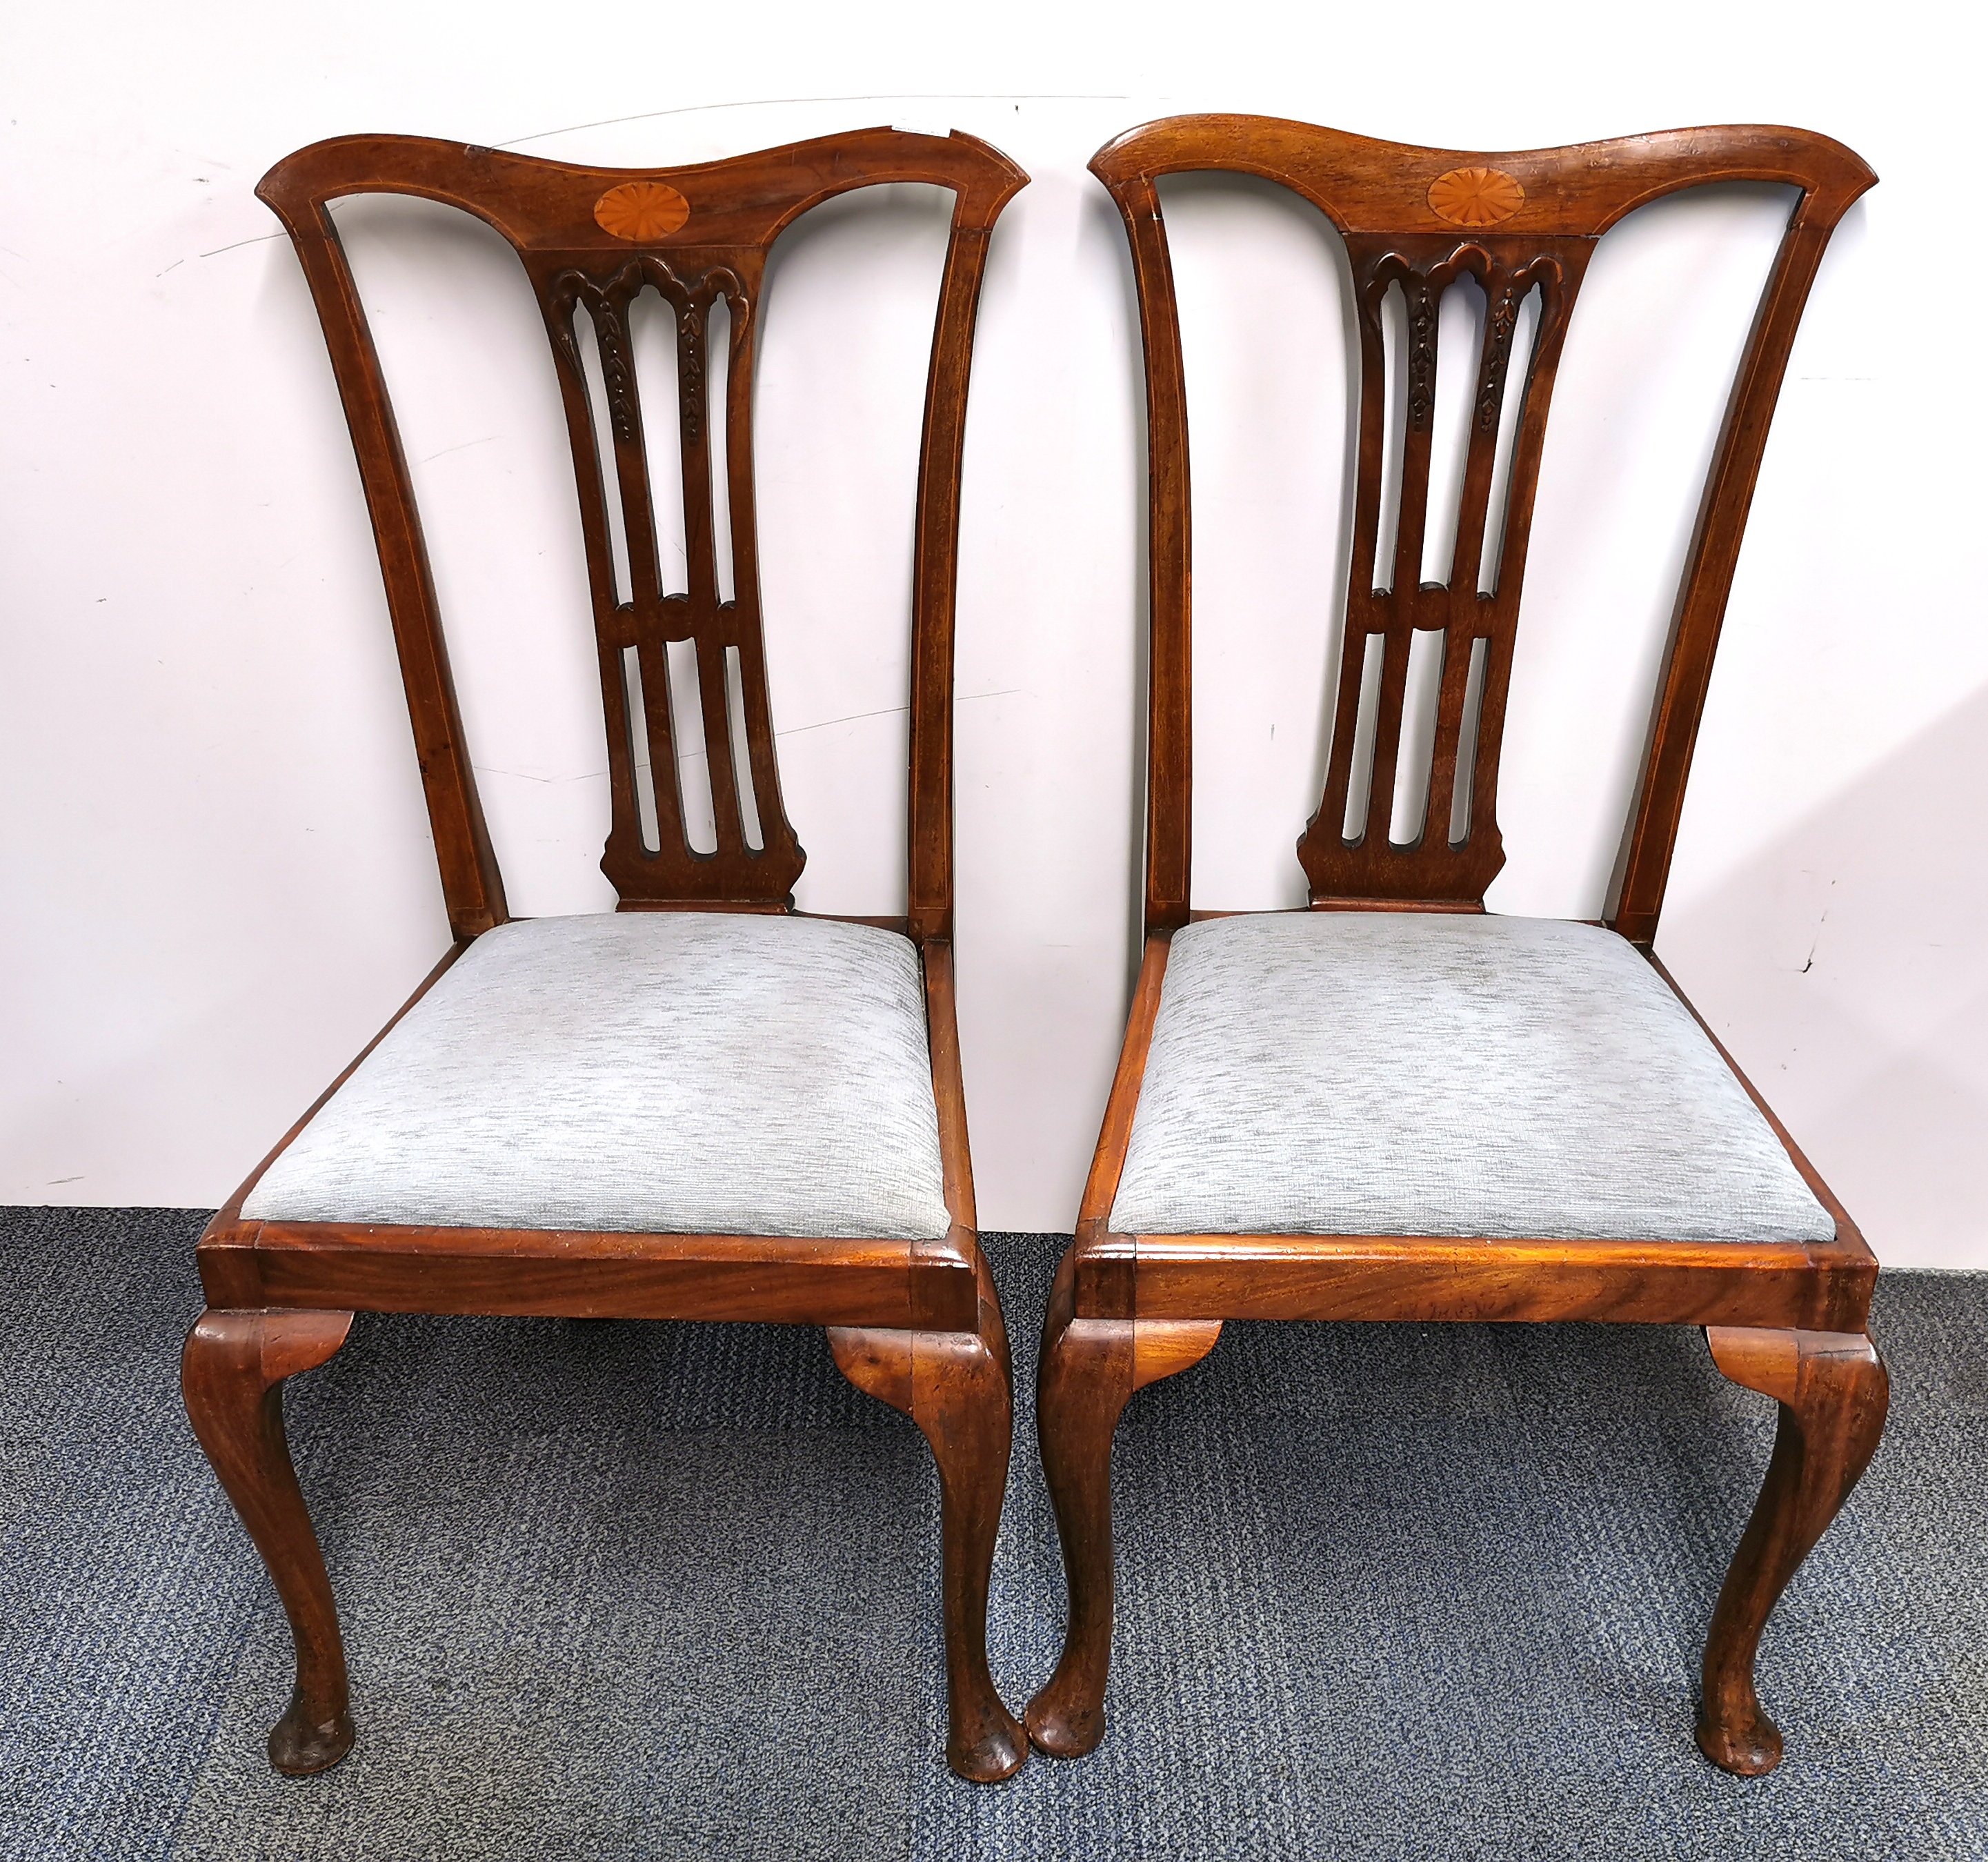 A pair of inlaid mahogany Chippendale style dining chairs.